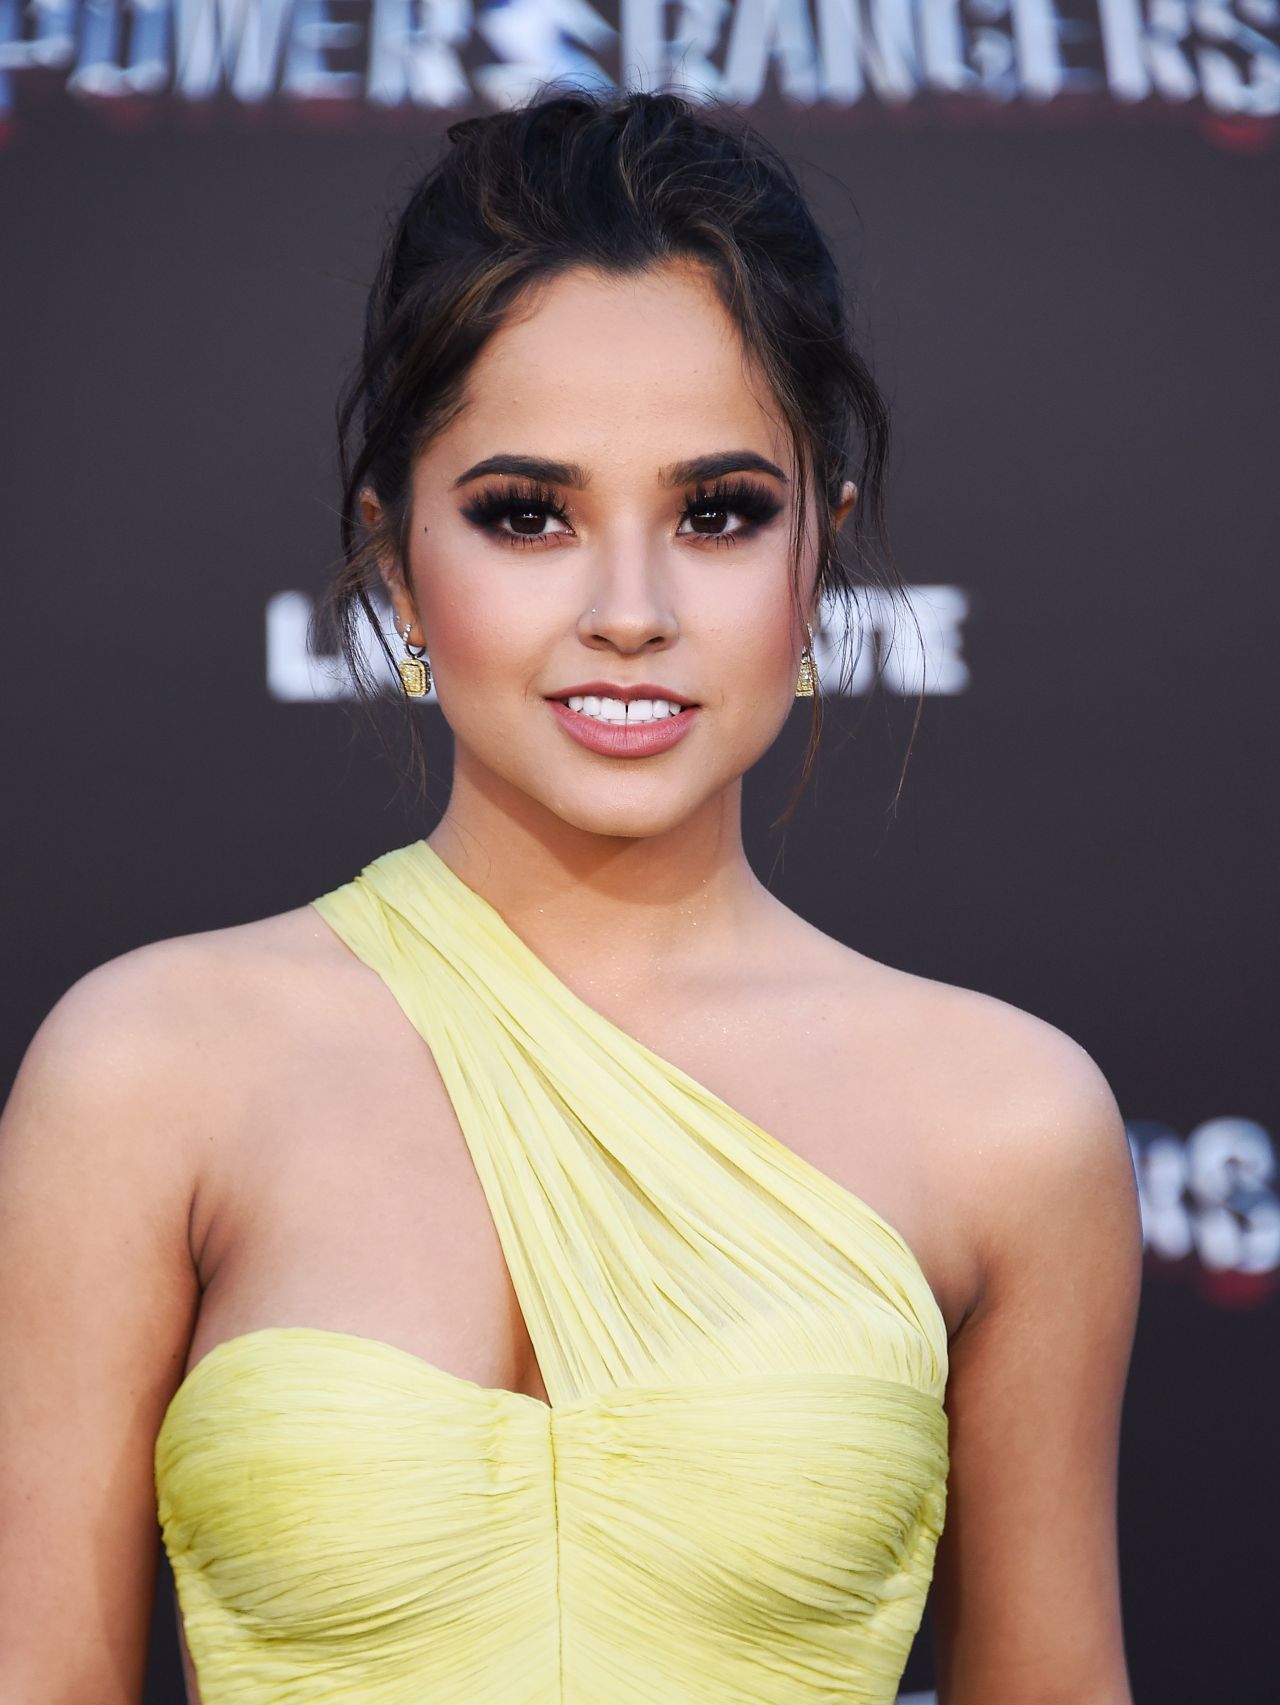 becky-g-power-rangers-premiere-in-los-angeles-3-22-2017-11.